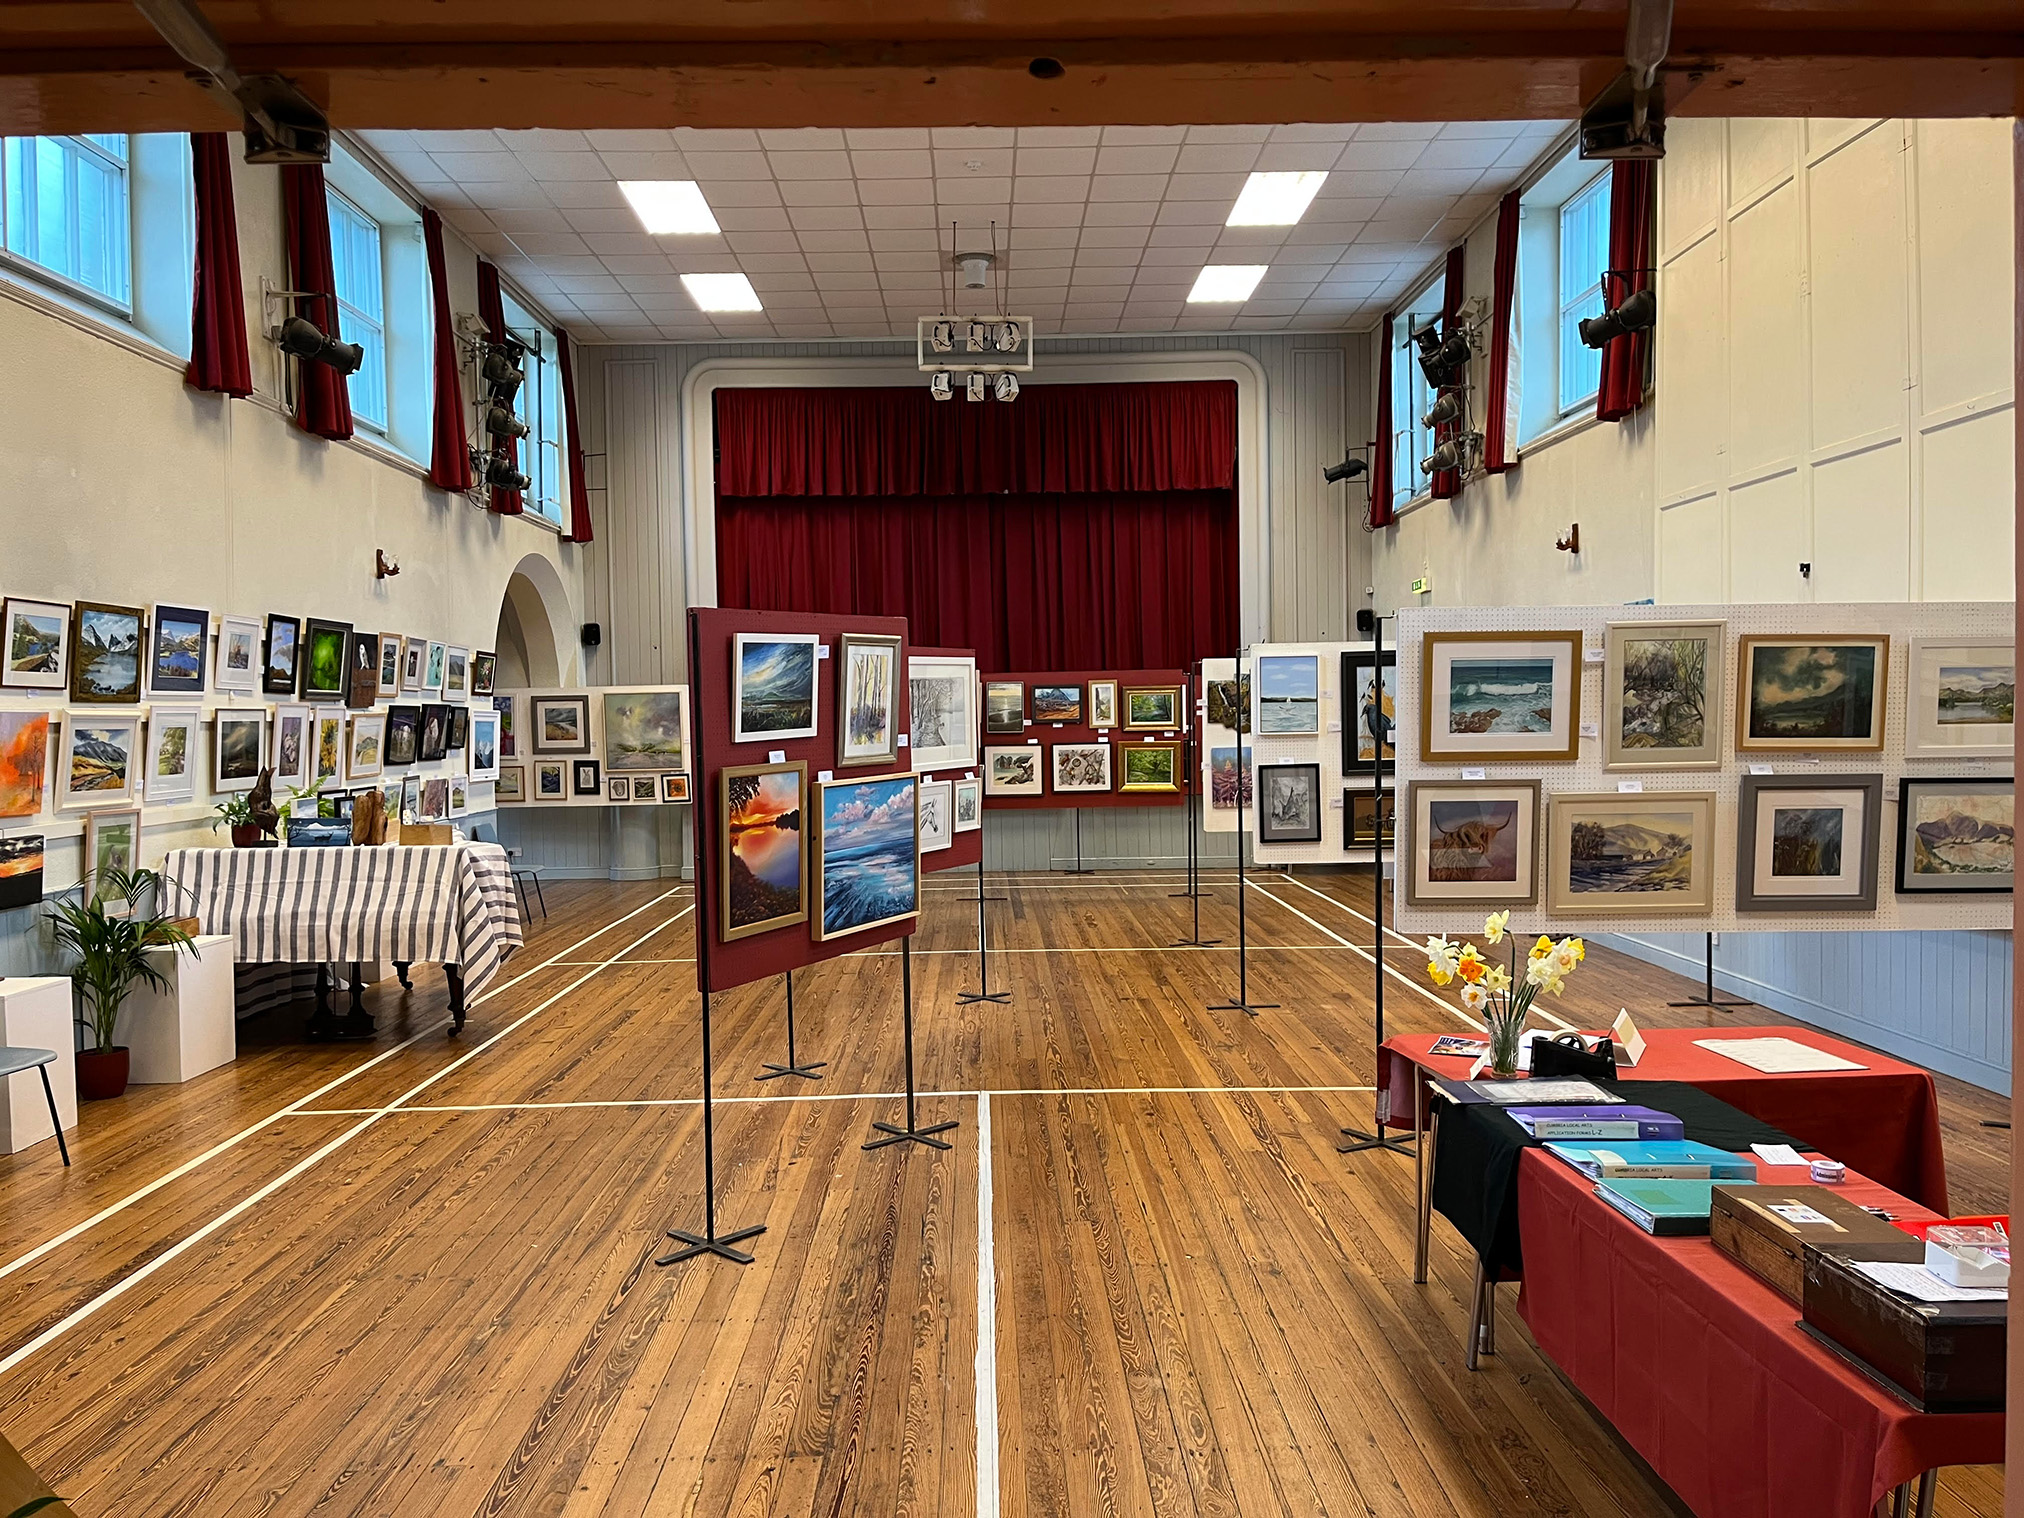 Cumbria Local Arts Exhibition held every year in Grasmere, Lake District, UK. Exhibiting original work by 115 artists living in Cumbria for over 45 years.